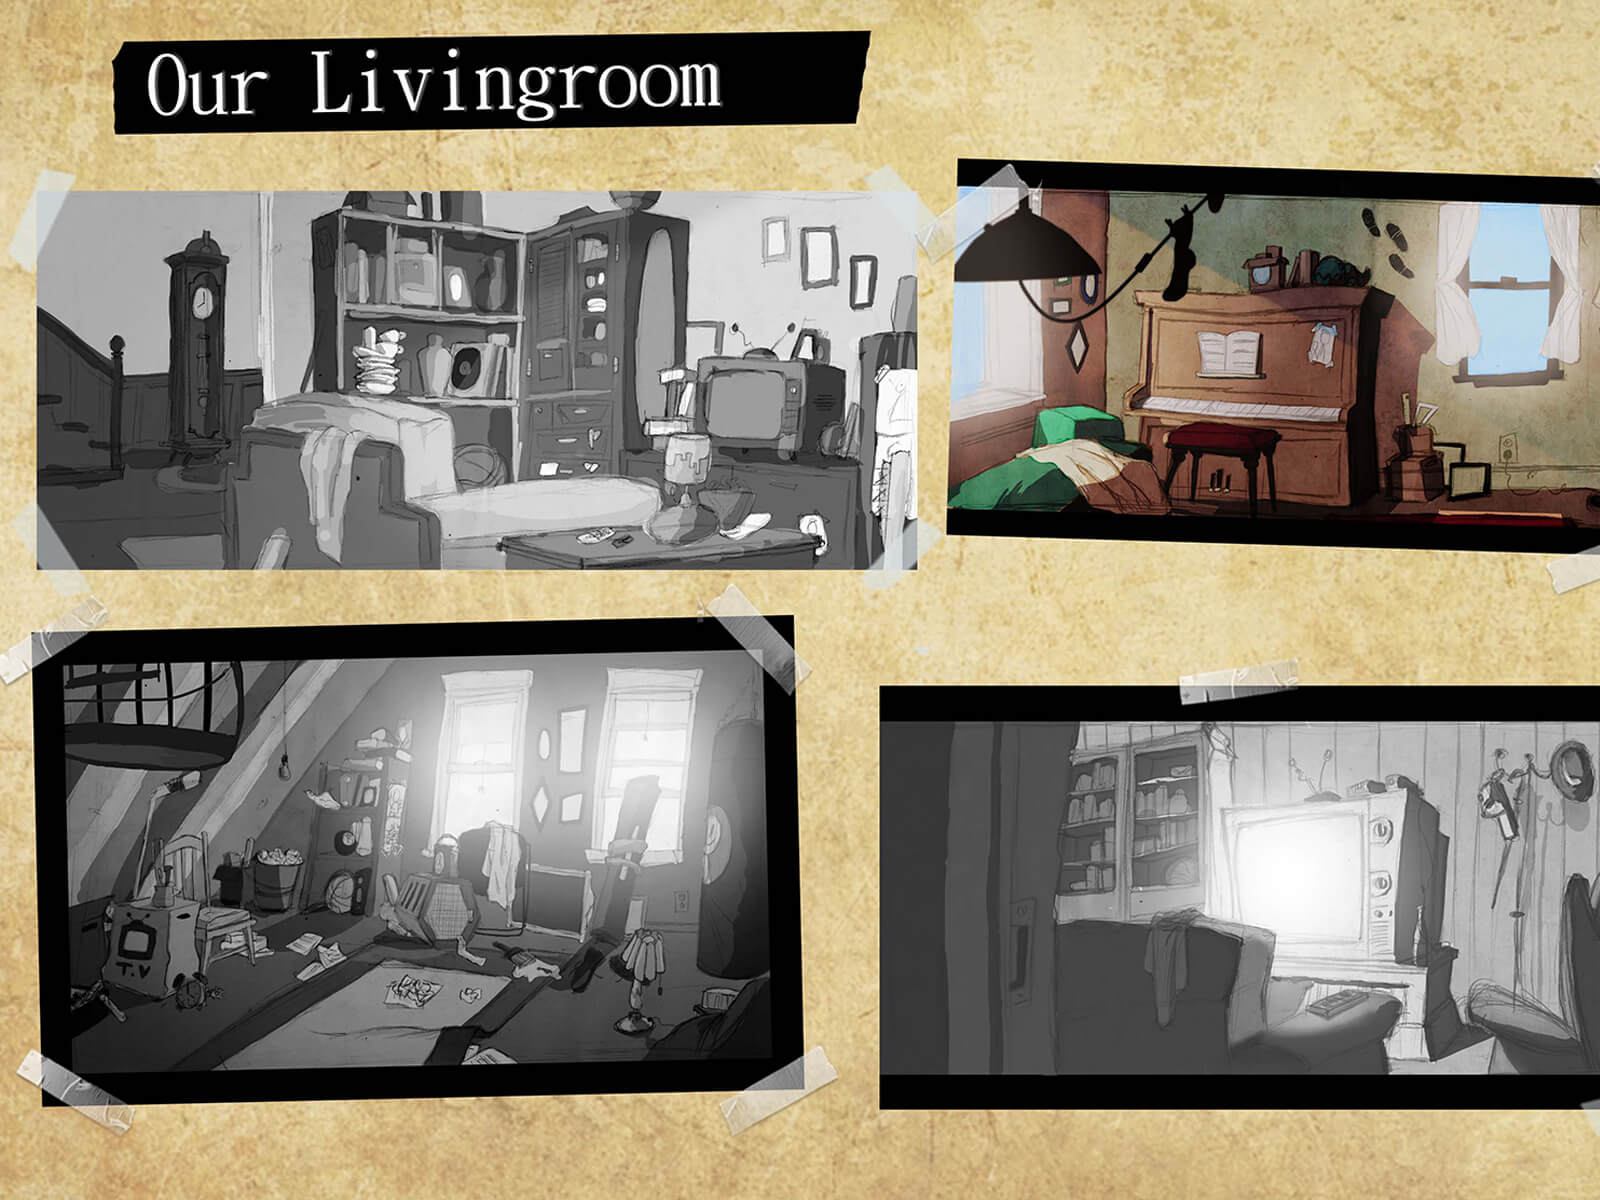 Concept art of a messy living room including a couch, television, upright piano, lamps, a grandfather clock, and shelves.